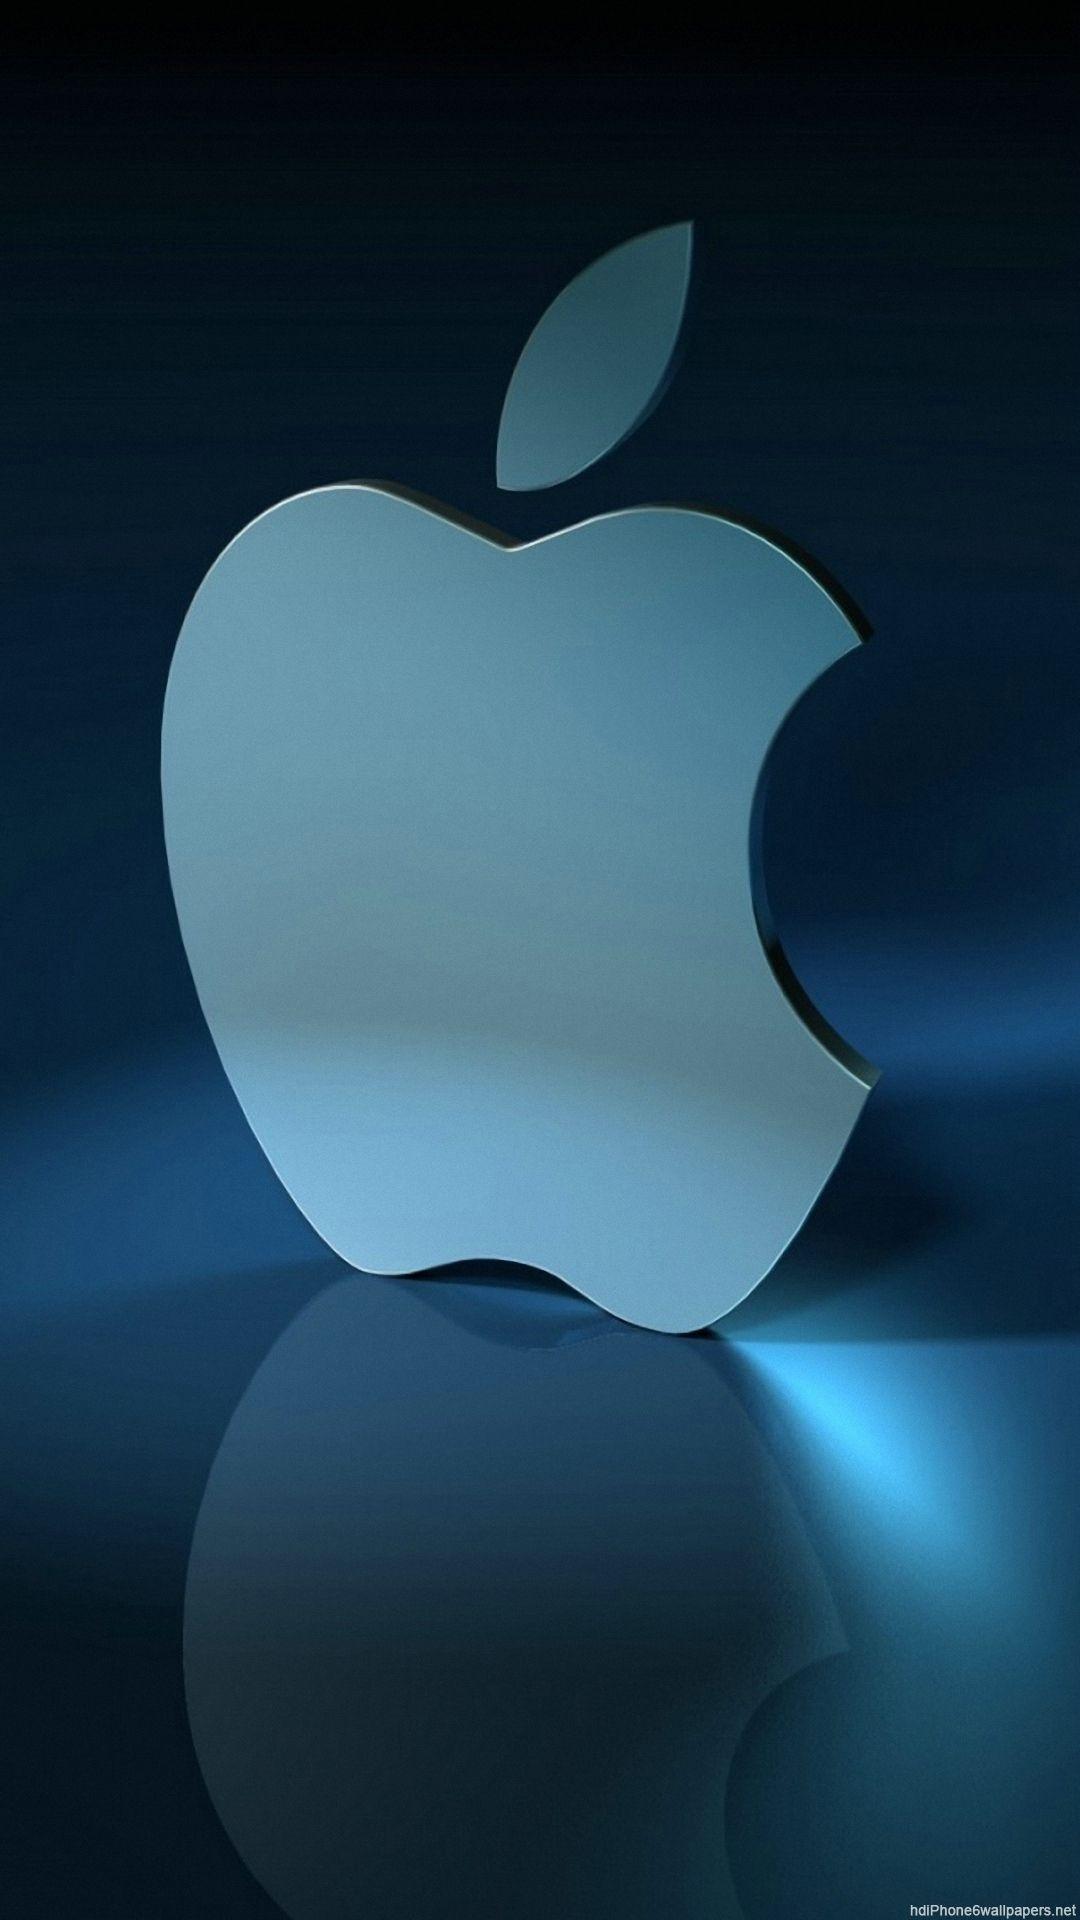 Apple iPhone Wallpapers - Wallpaper Cave